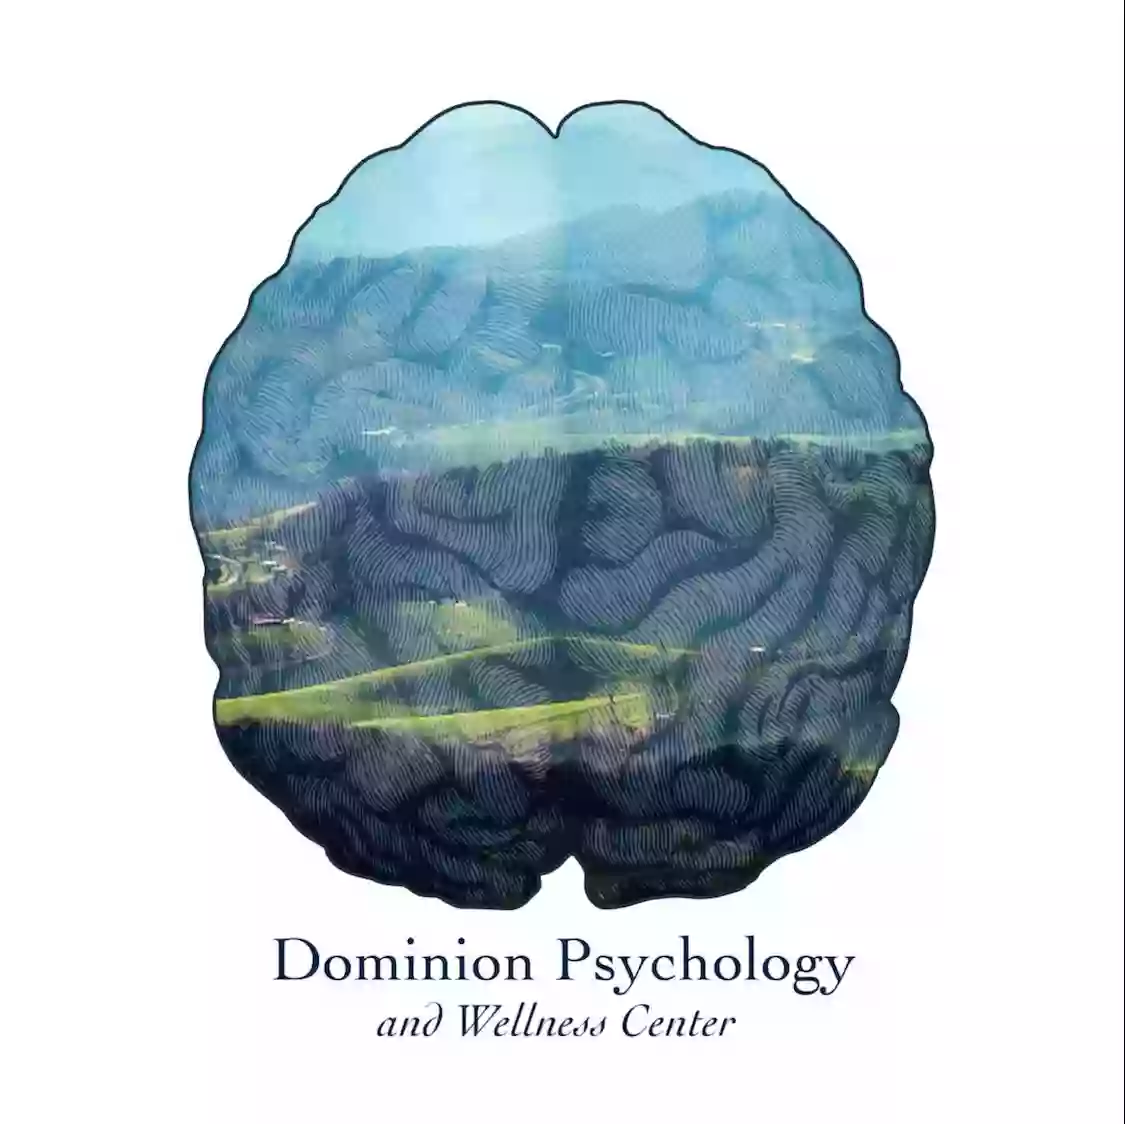 Dominion Psychology and Wellness Center